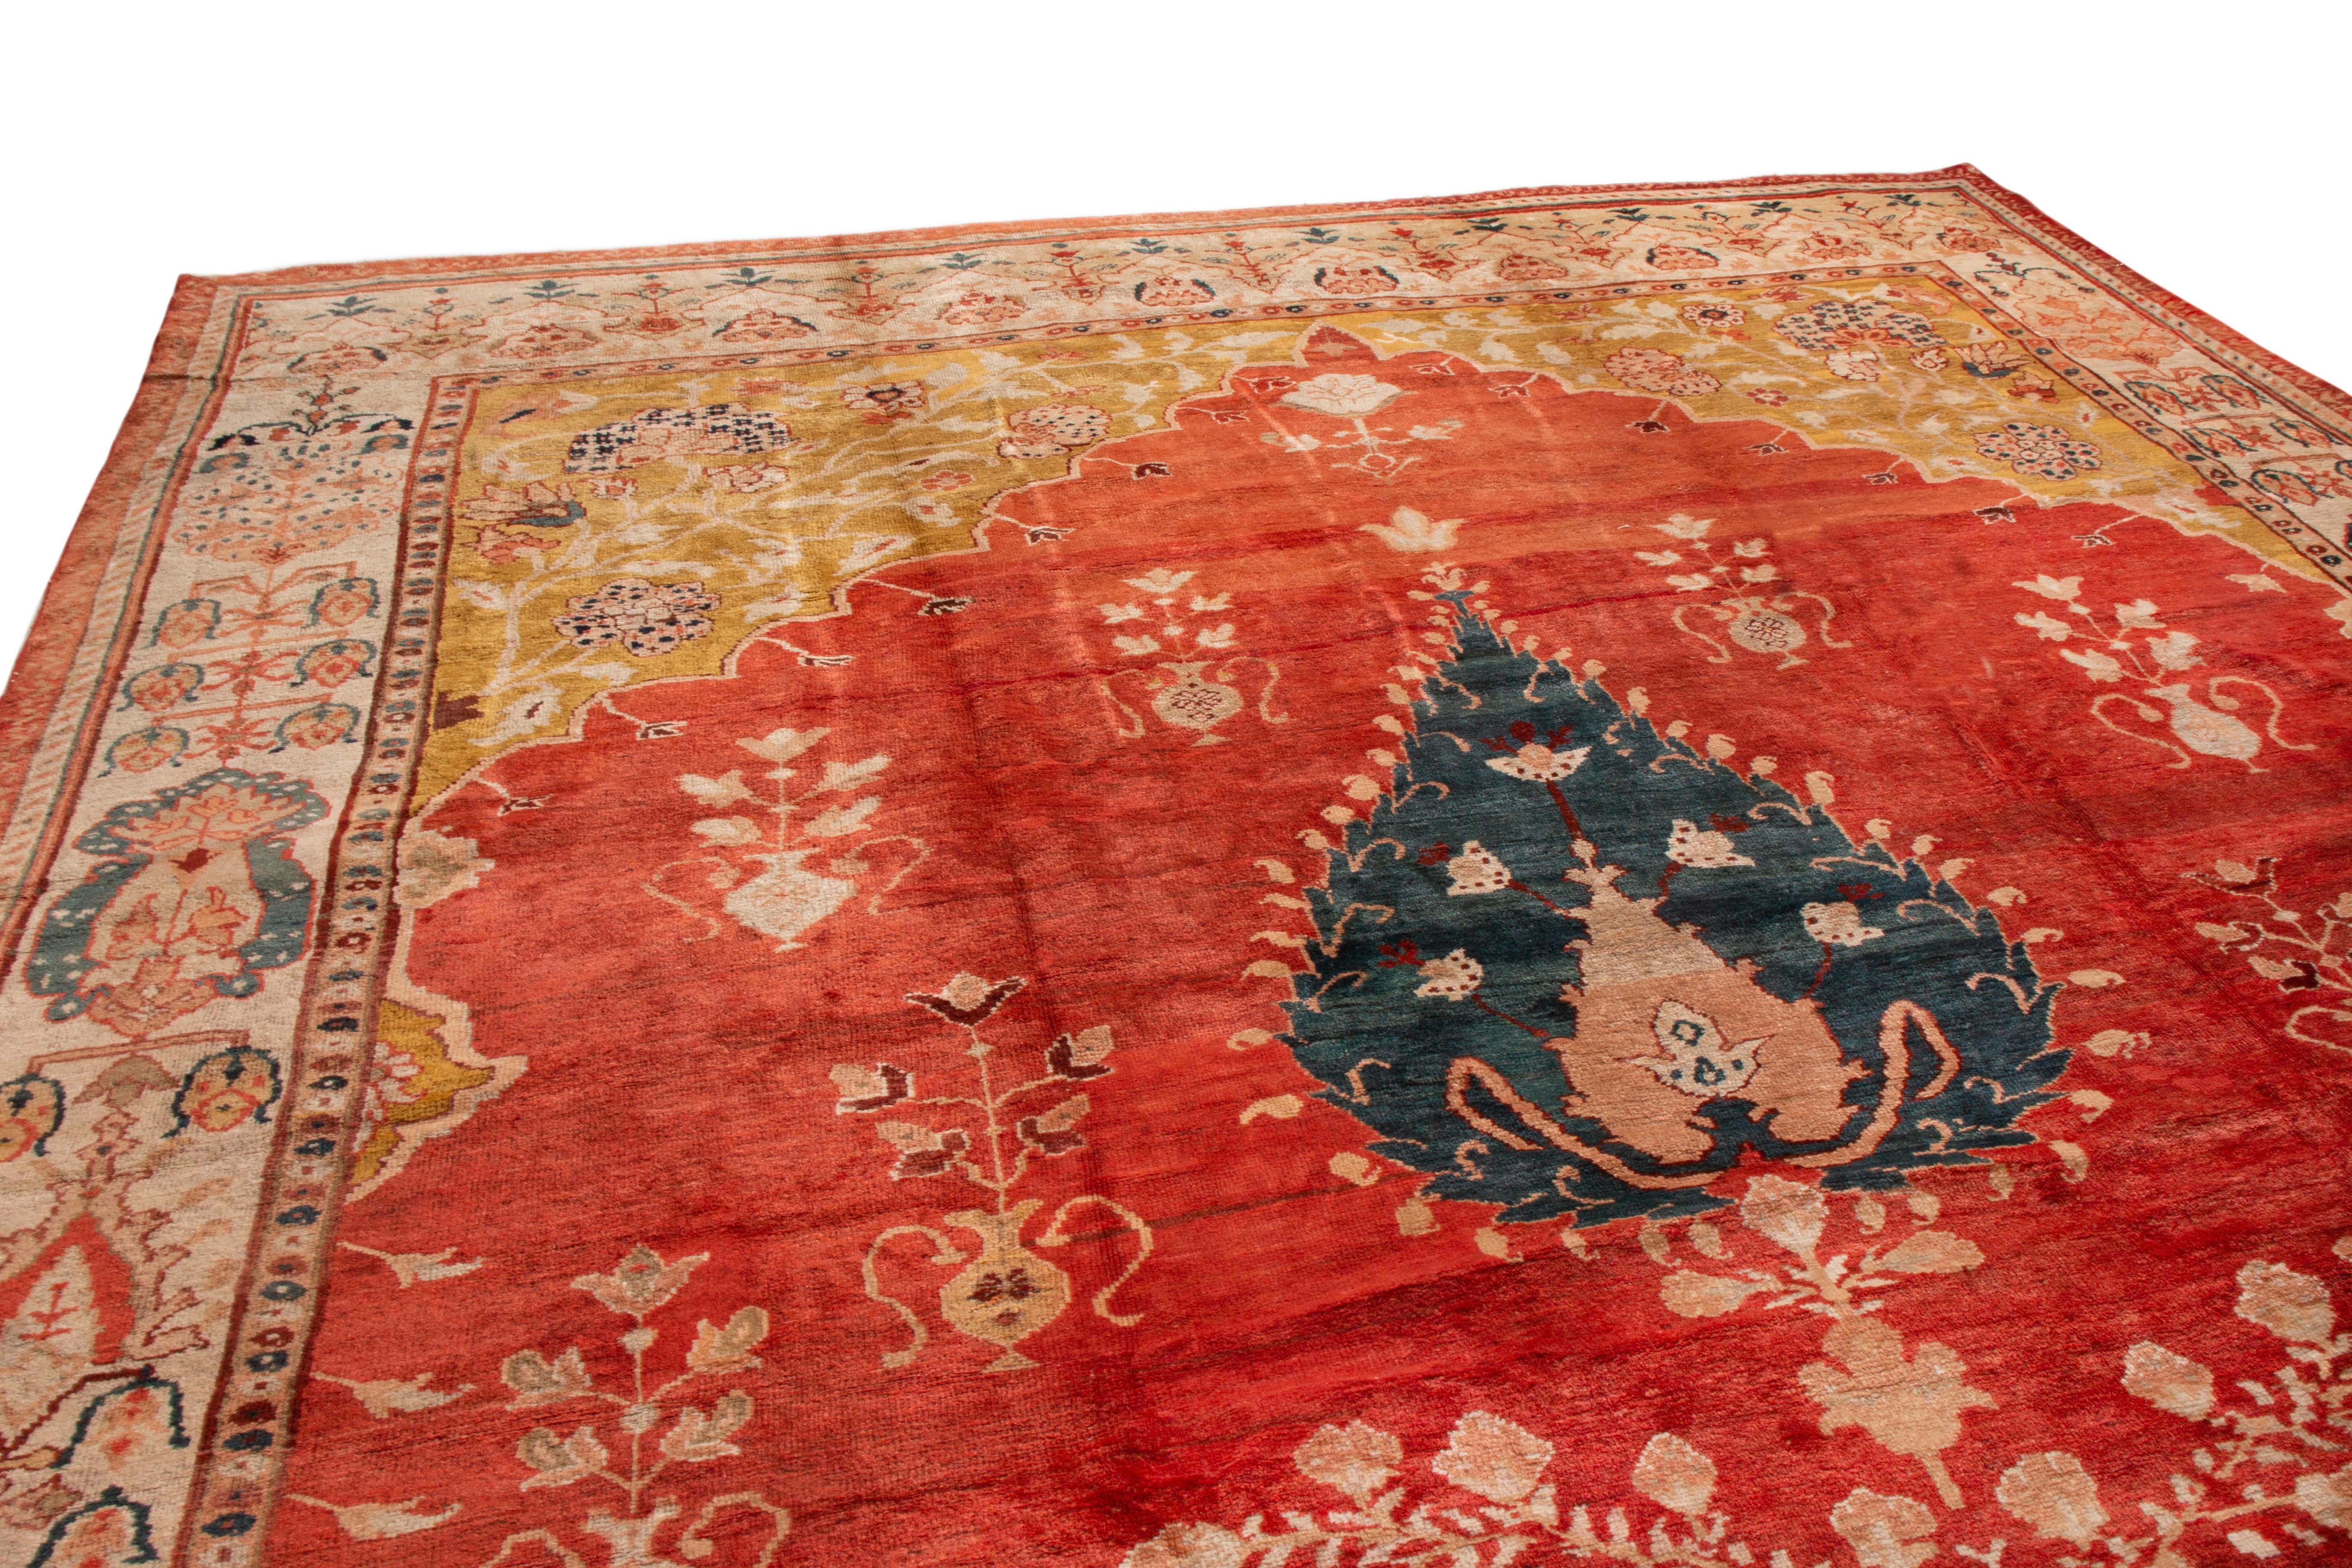 This antique Sultanabad rug has an uncommon field orientation for a Persian rug. From 1890-1900, its well-drawn graph was designed with only vertical symmetry, whereas many Sultanabad rugs typically had both vertical and horizontal orientation. Both